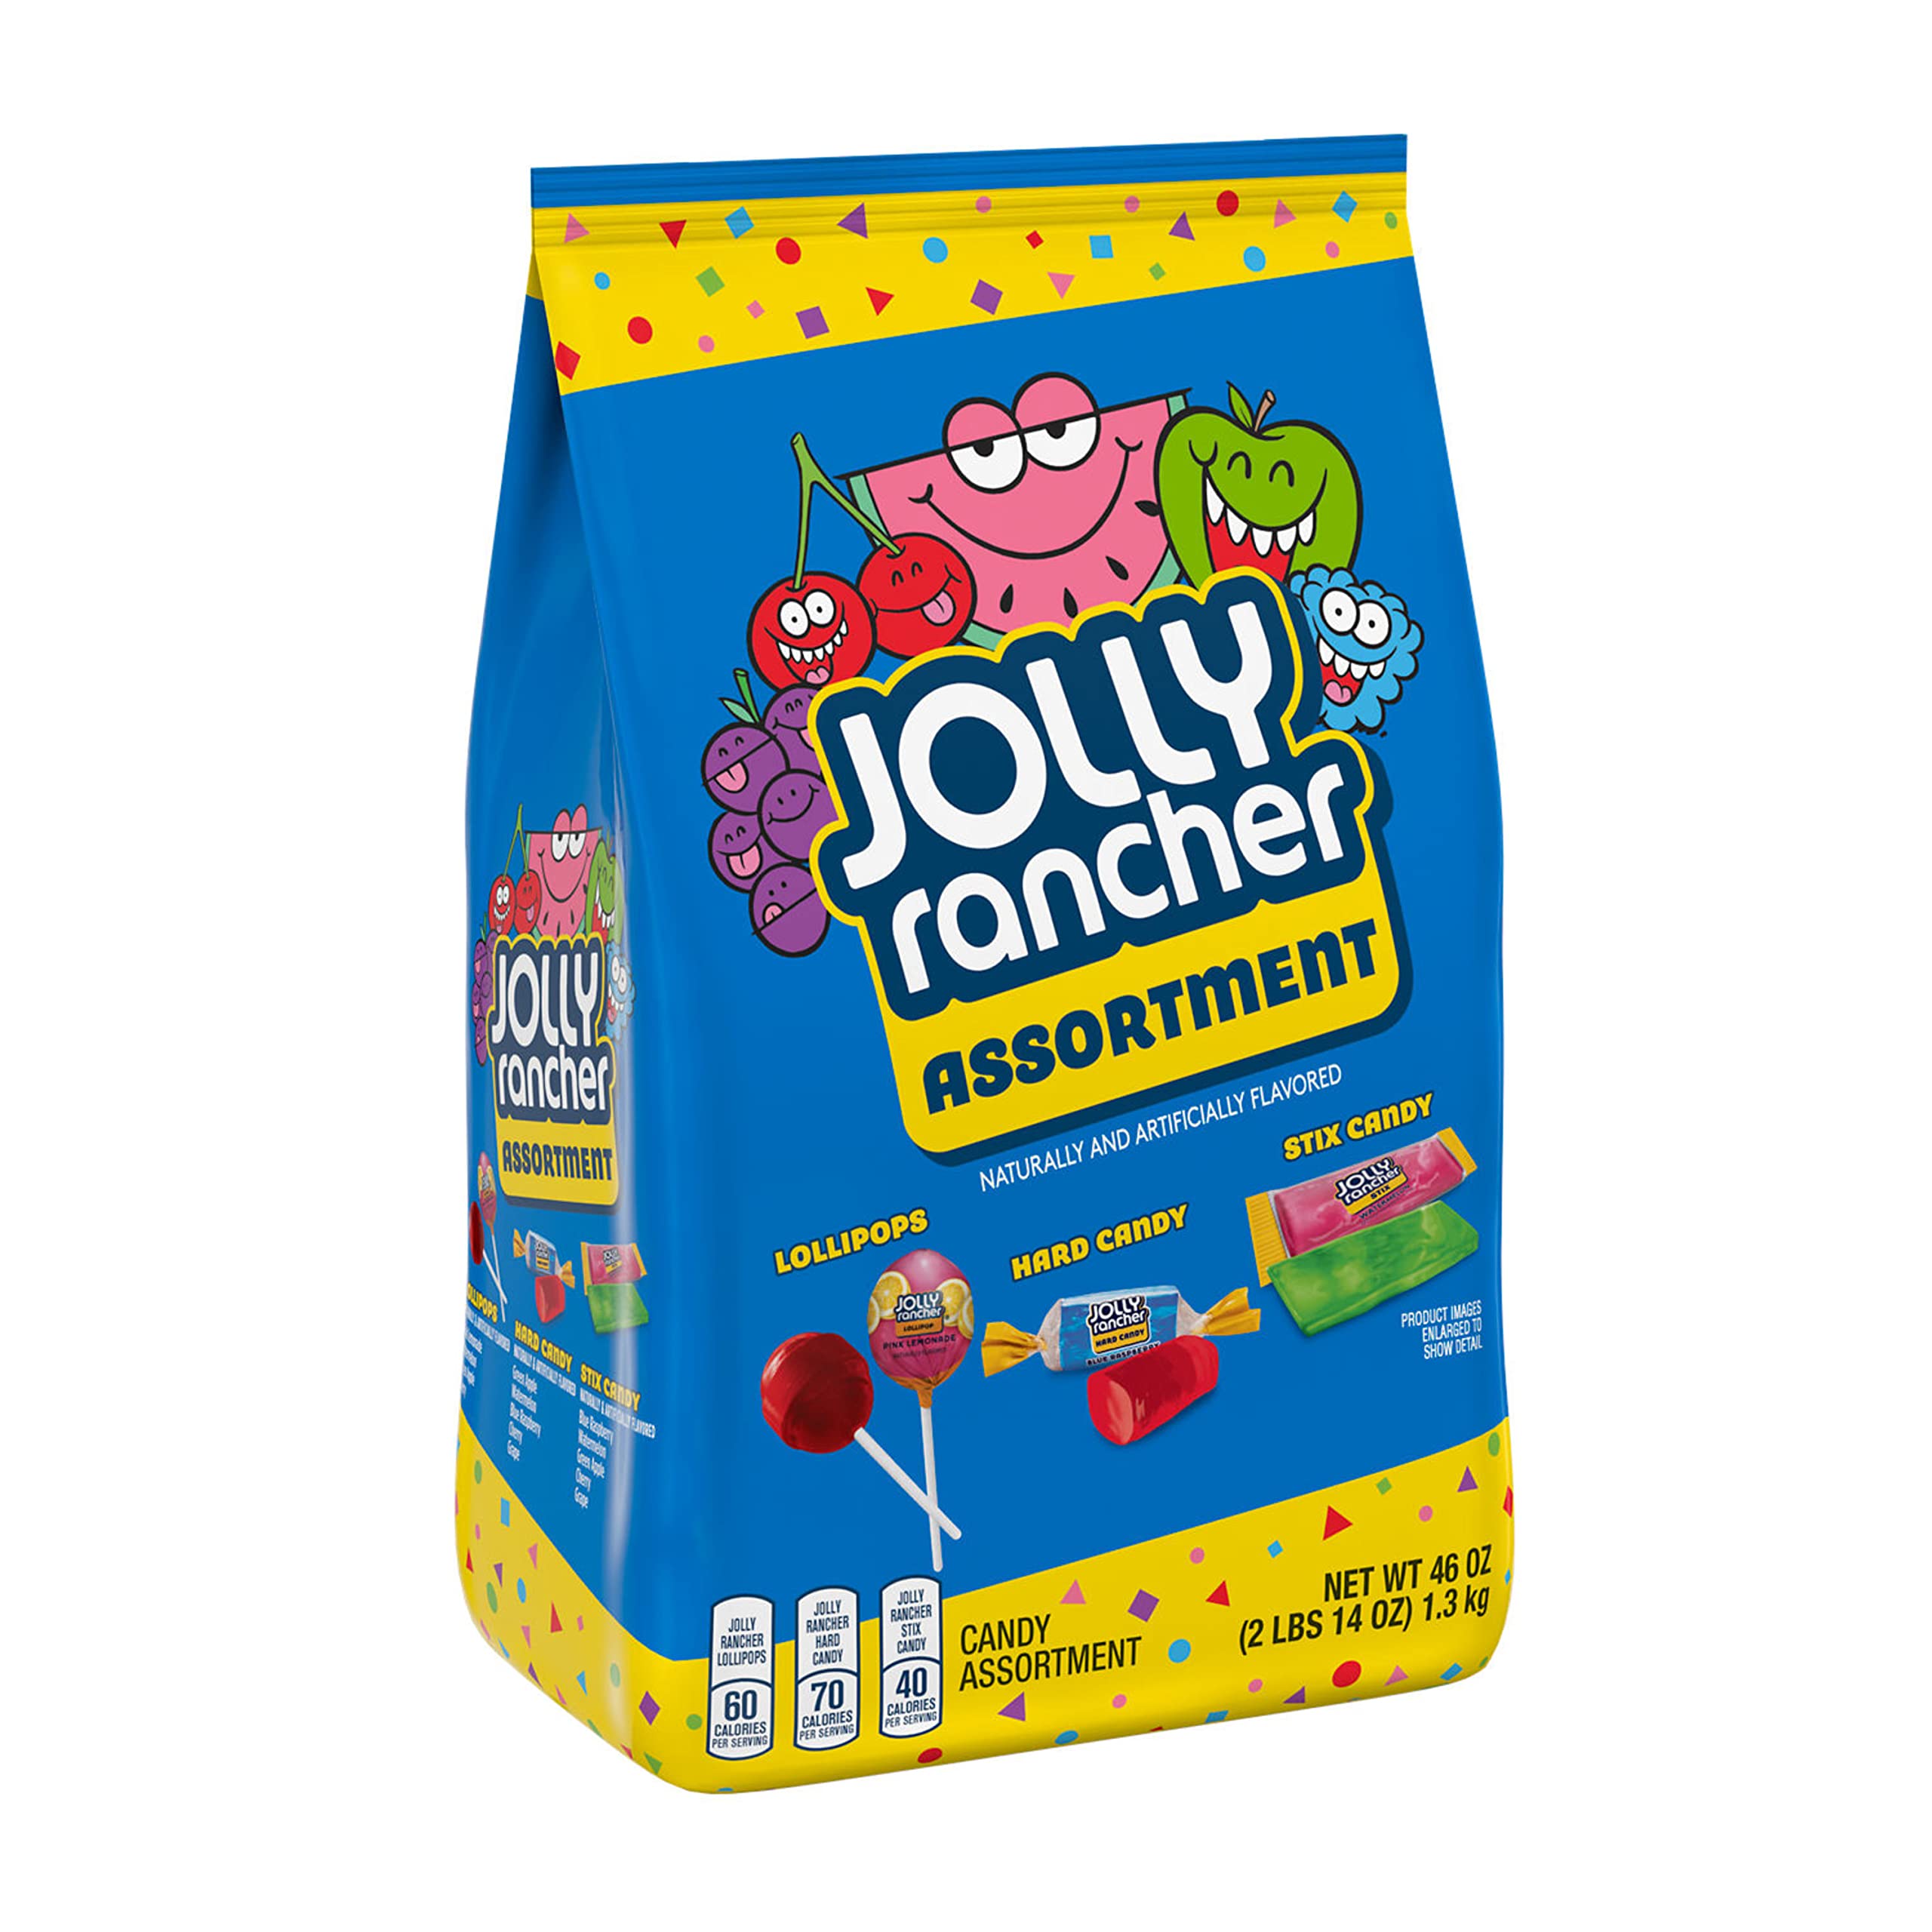 0.46-Oz Jolly Rancher Hard Candy Variety Bag (Hard Candy, Stix Candy & Lollipops) $7.99 w/ S&S + Free Shipping w/ Prime or on $35+